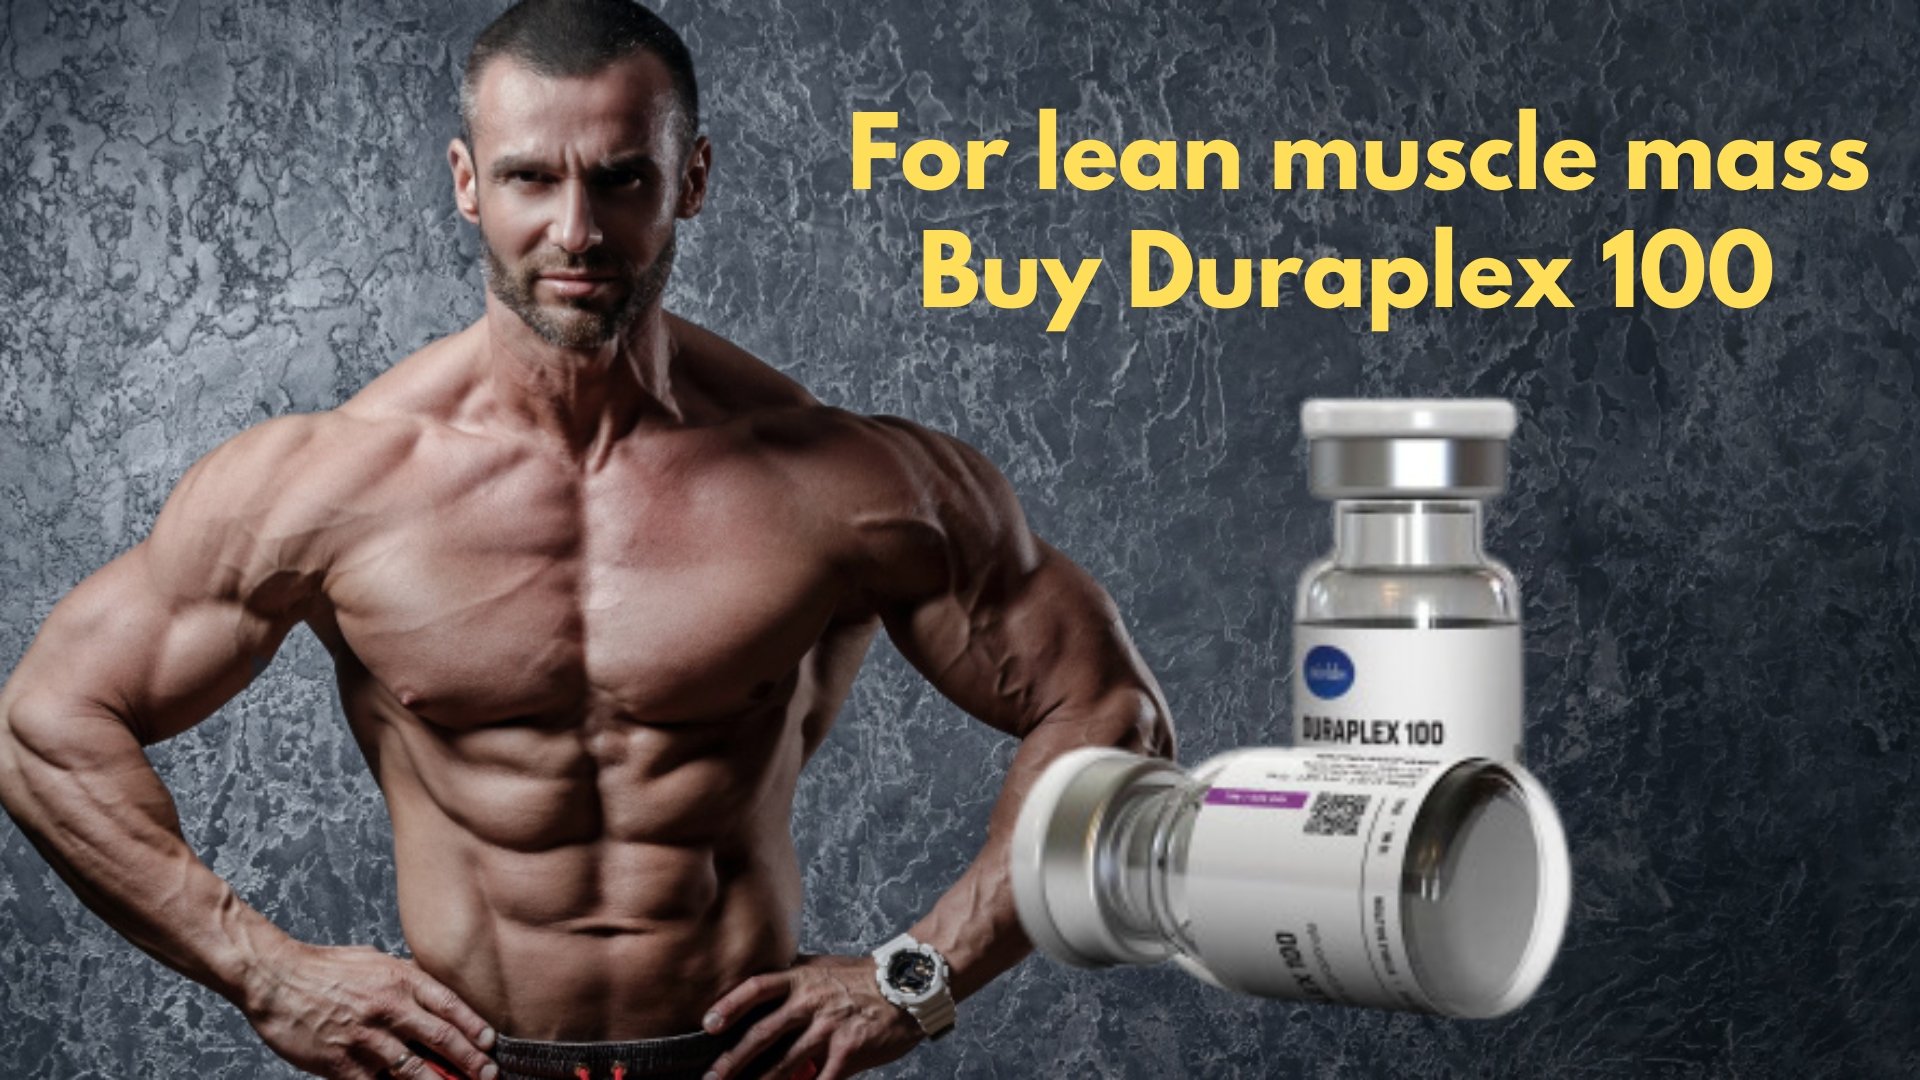 Articles Image Why Buy Duraplex 100 and Not Deca Durabolin